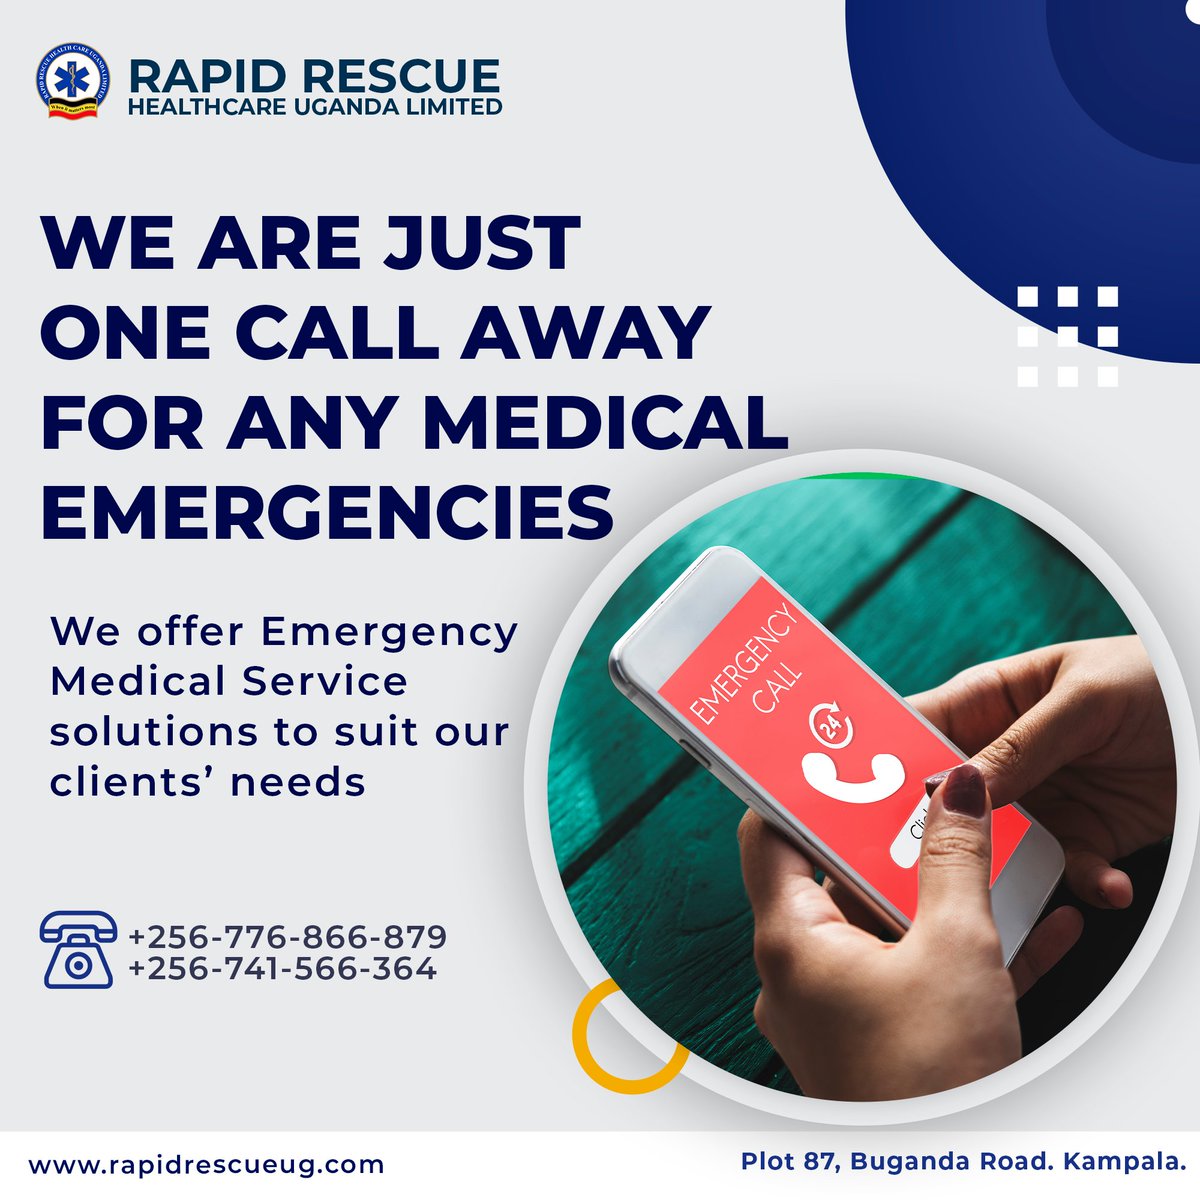 As you take very insightful Health tips from @drkasenene remember we are just a call away incase of any health emergencies during your gym, jogging or if you need an ambulance ride for a medical checkup or hospital transfer. We've got you!! #healthylifestye